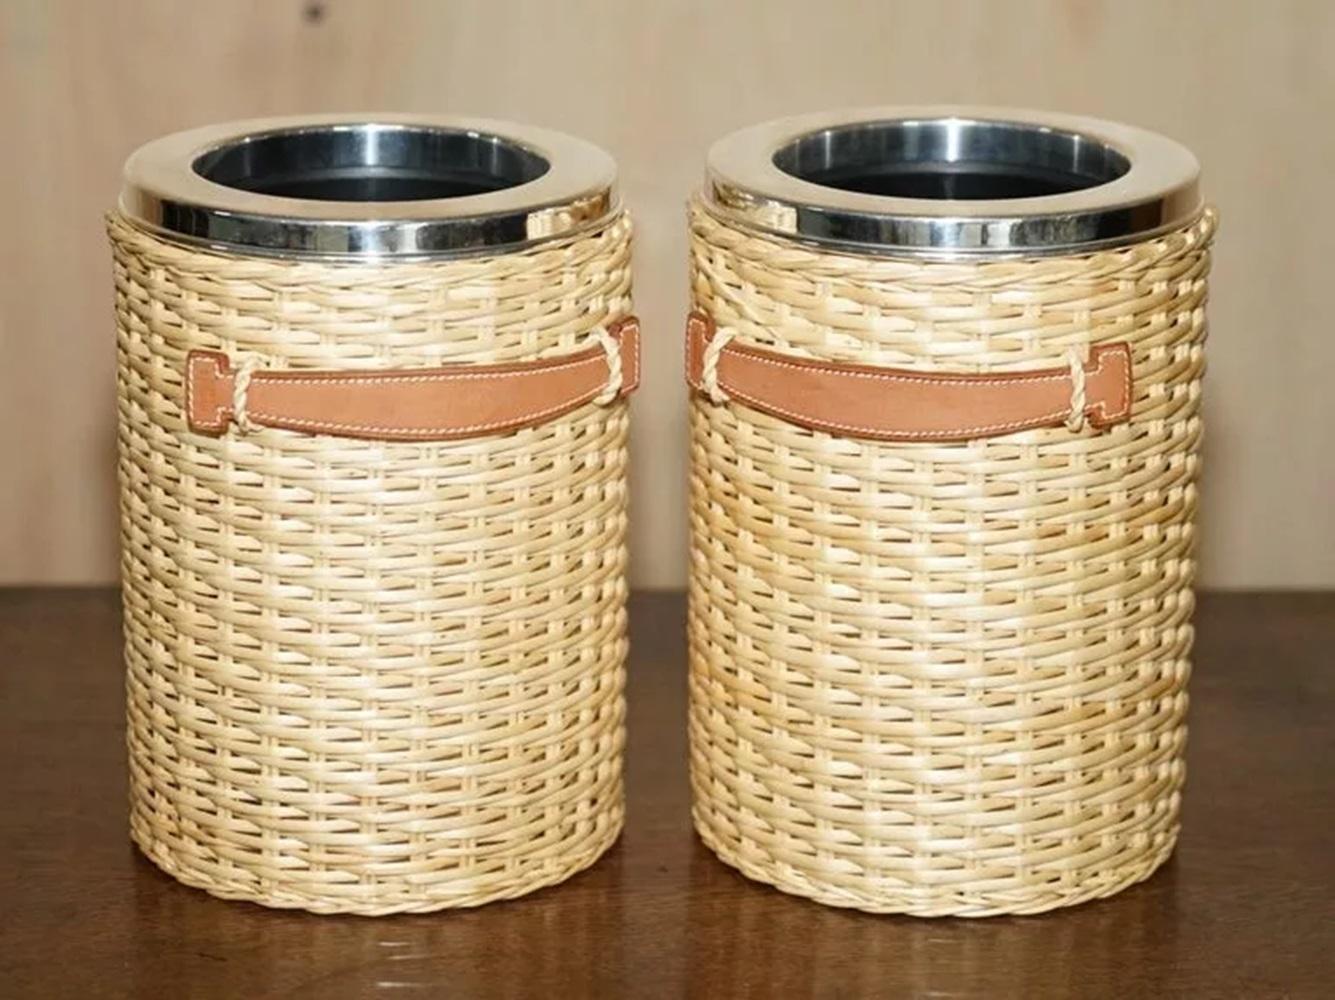 Royal House Antiques

Royal House Antiques is delighted to offer for sale this  once in a lifetime opportunity to own this custom made pair of Wine Coolers which are part of a suite of Hermes Paris “Farming” Kelly picnic equipment, Barenia Edition,